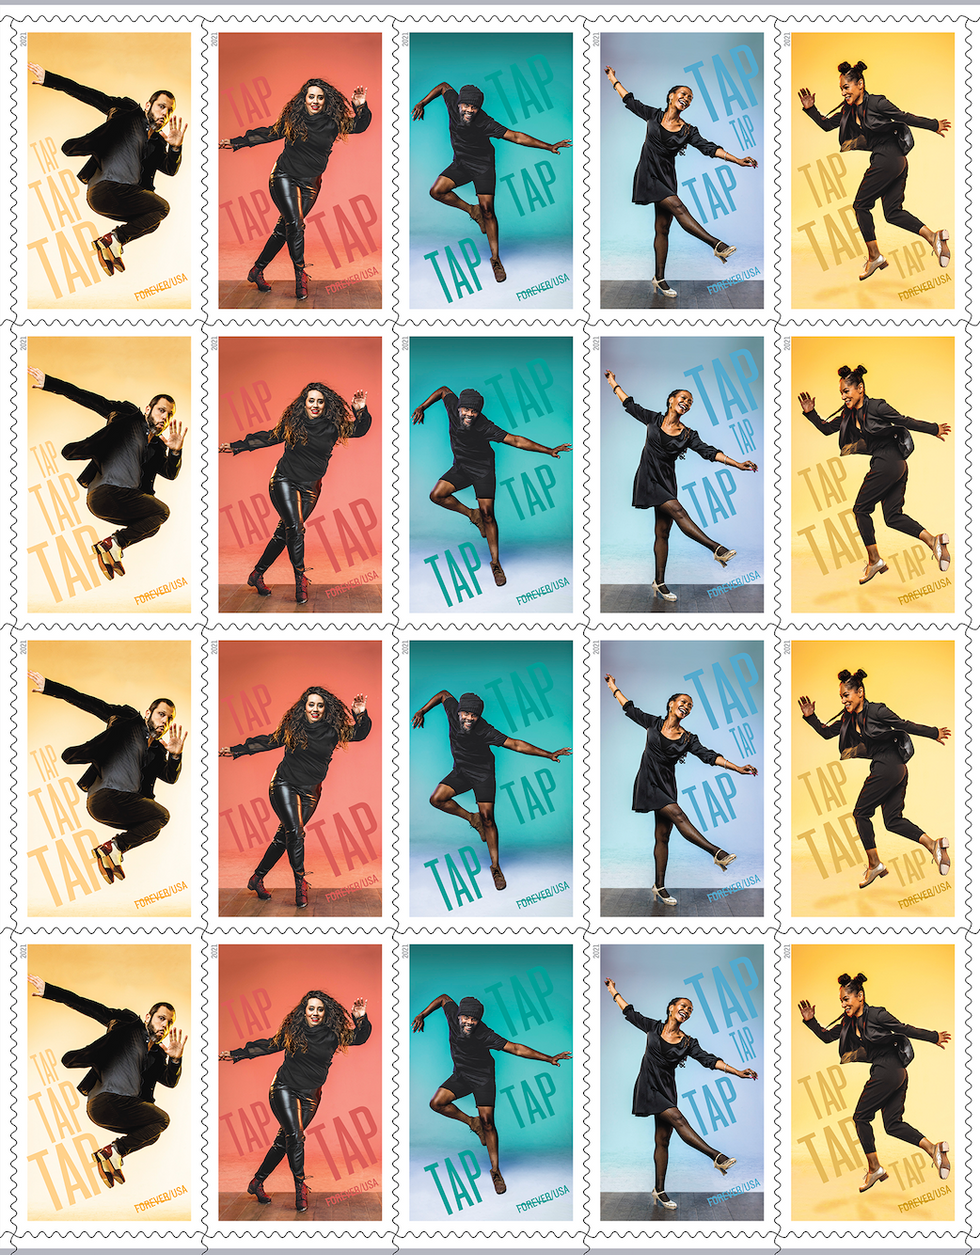 A sheet of stamps featuring dancers on brightly colored backgrounds. The word Tap dances around them.